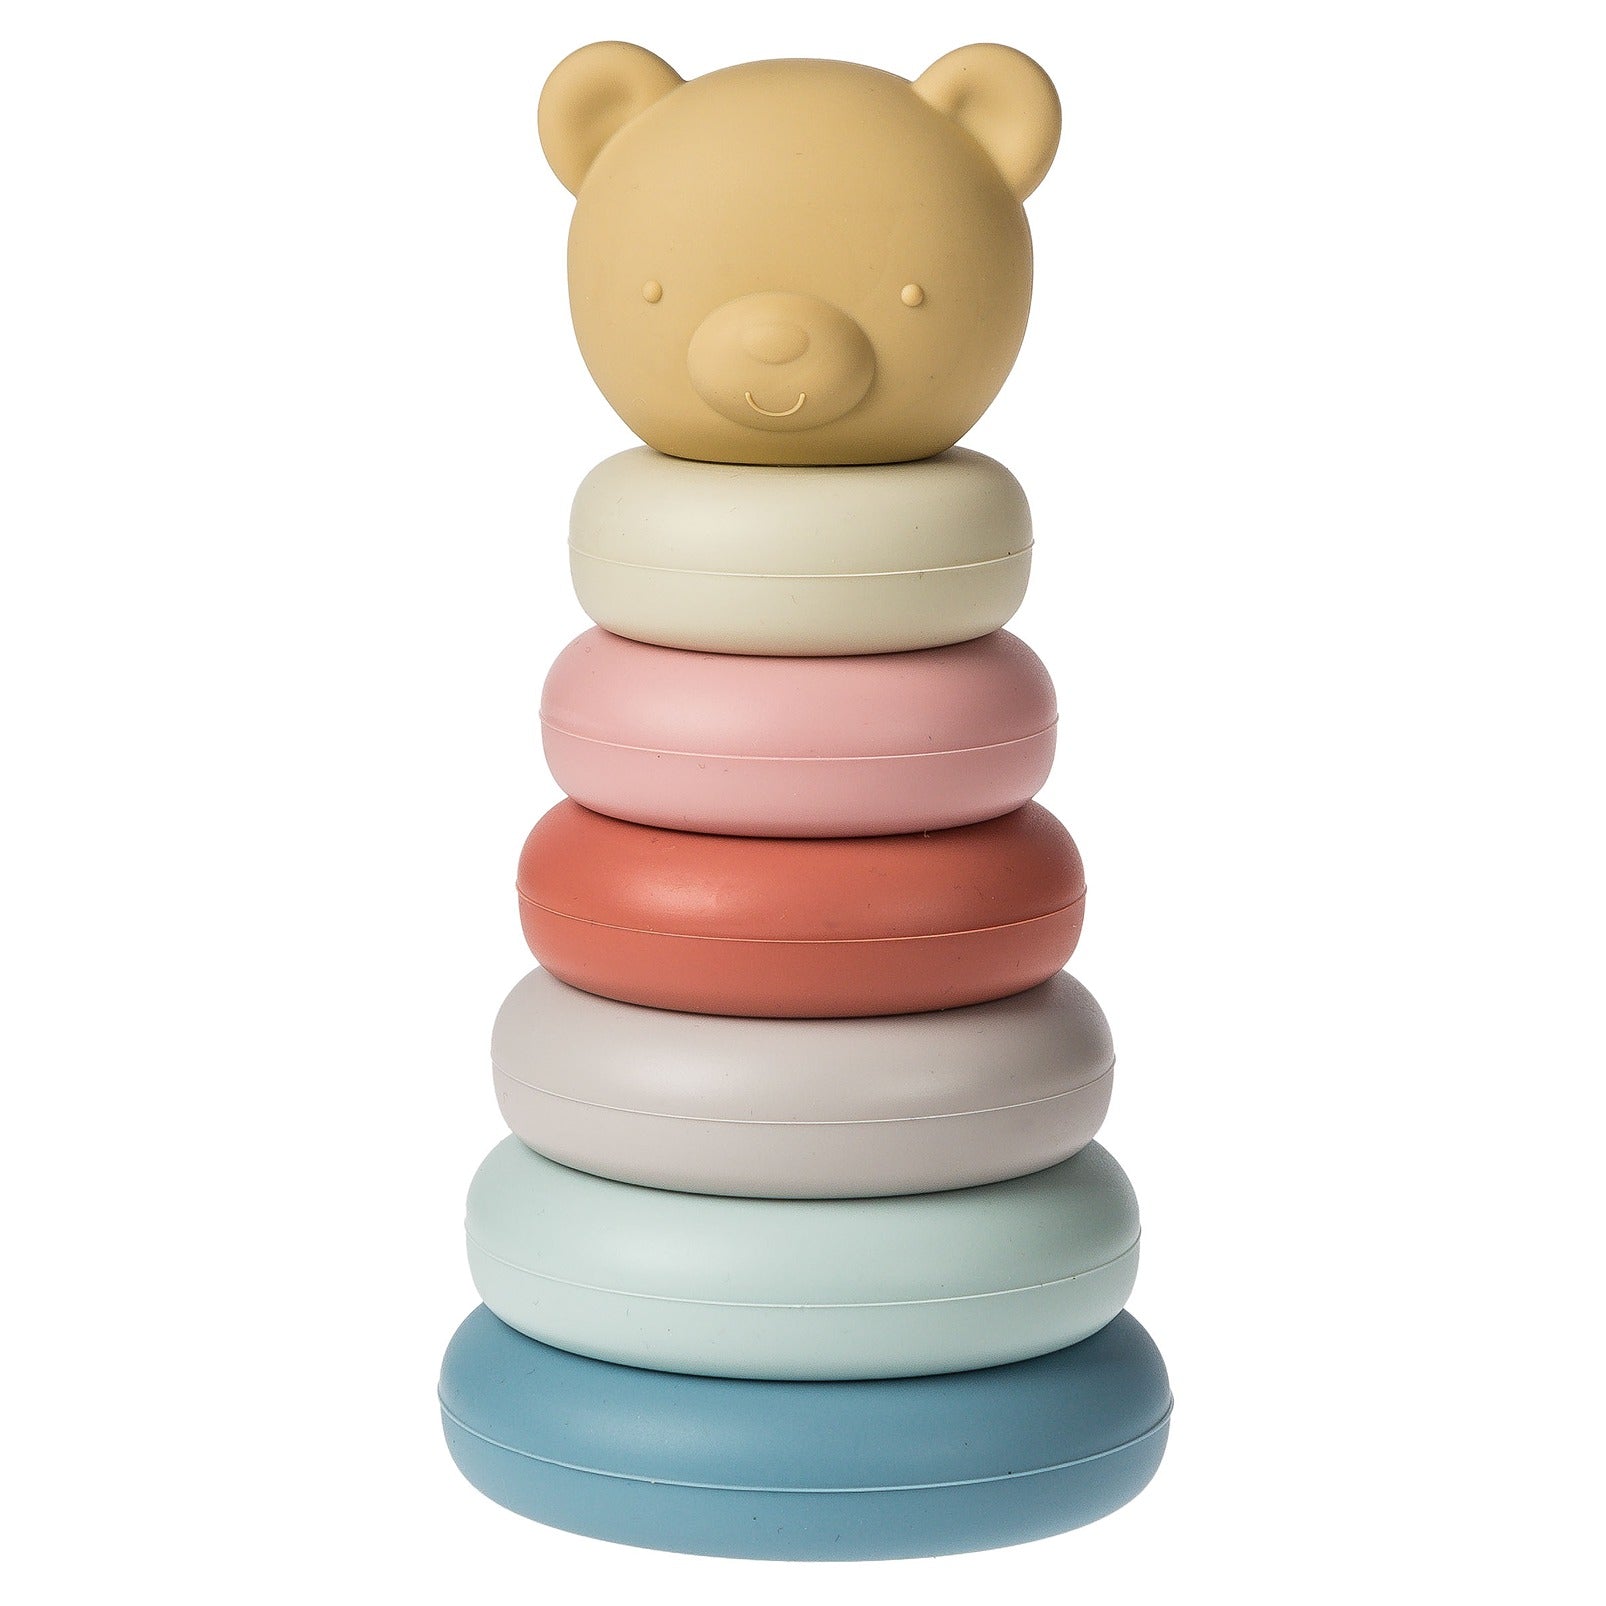 6 multi-coloured stacking rings with a yellow bear topper.